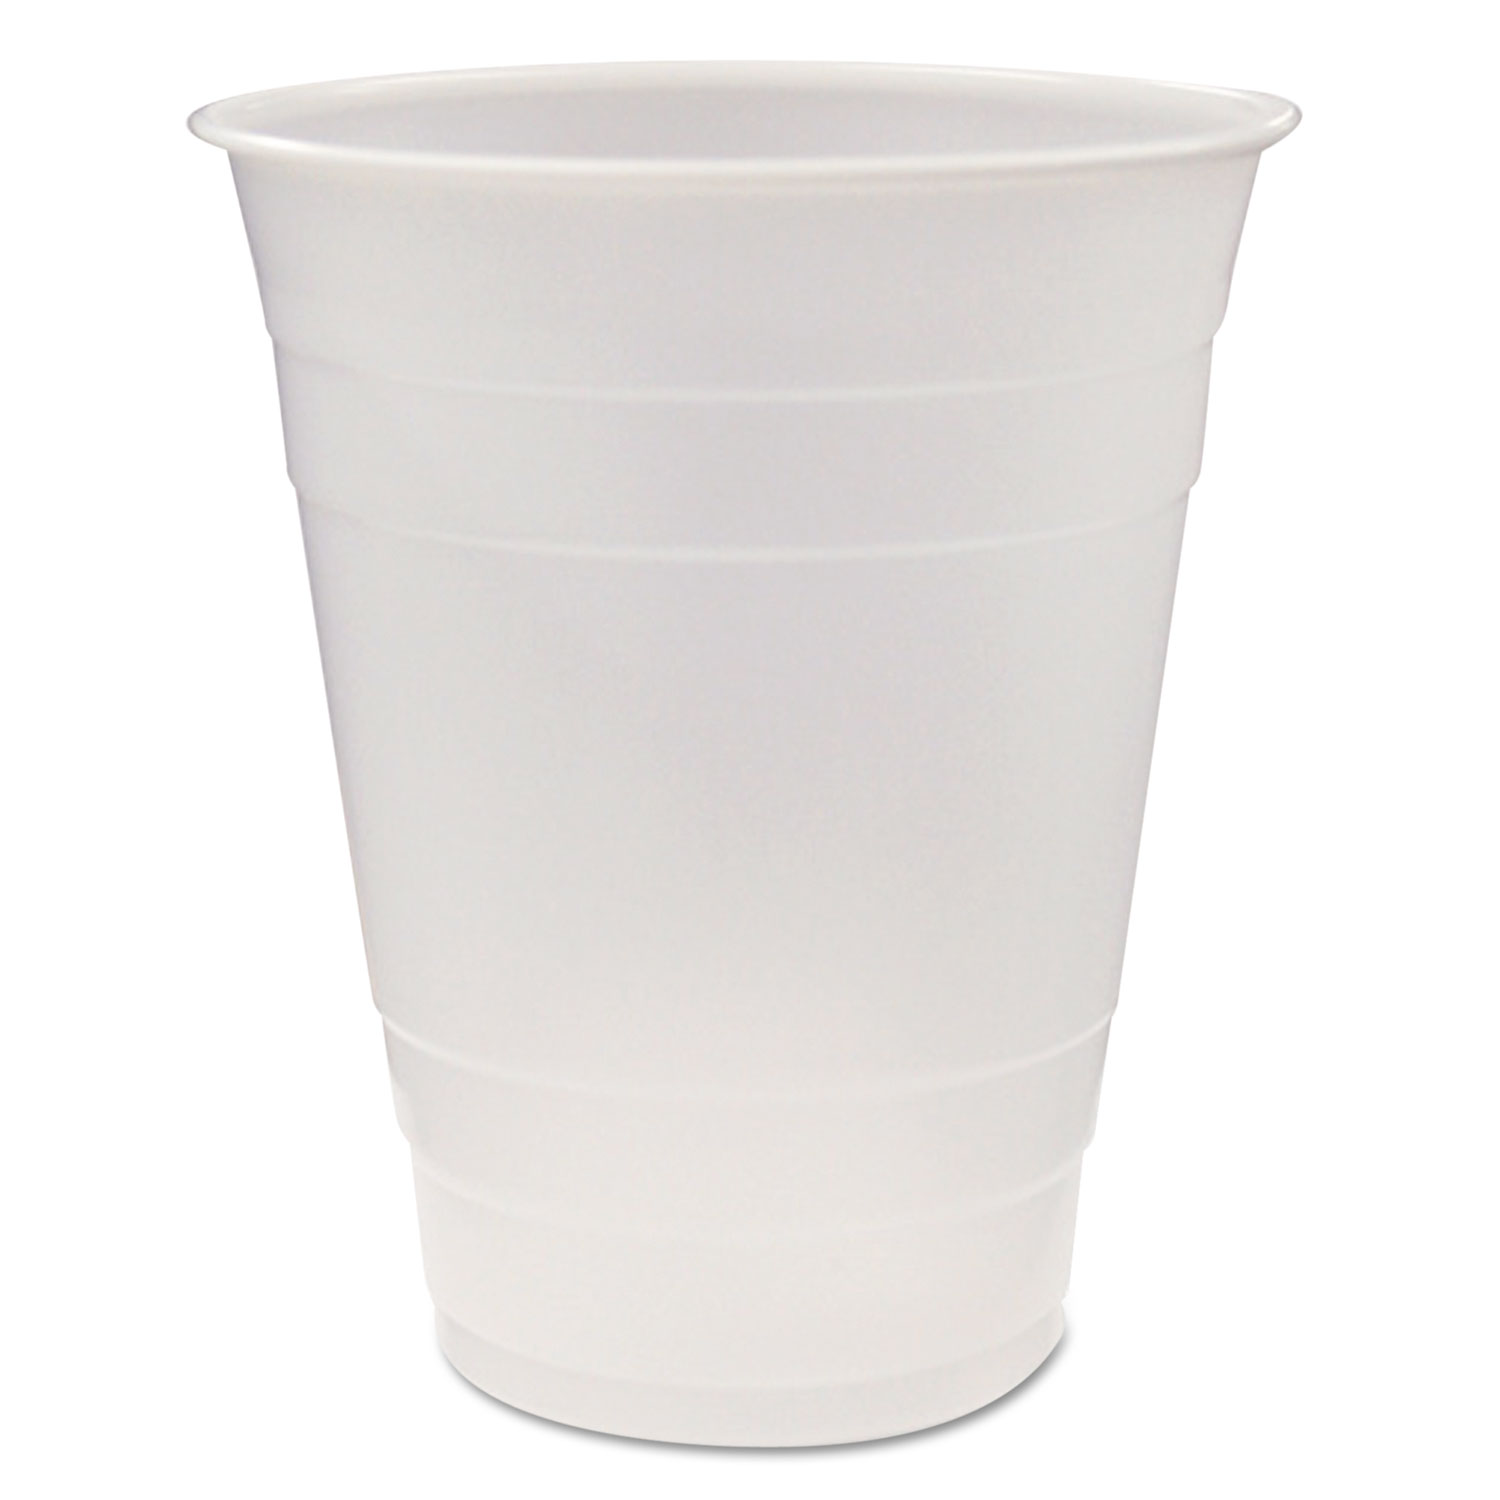  Pactiv YE160 Translucent Plastic Cups, 16 oz, Clear, 80/Pack, 12 Packs/Carton (PCTYE160) 